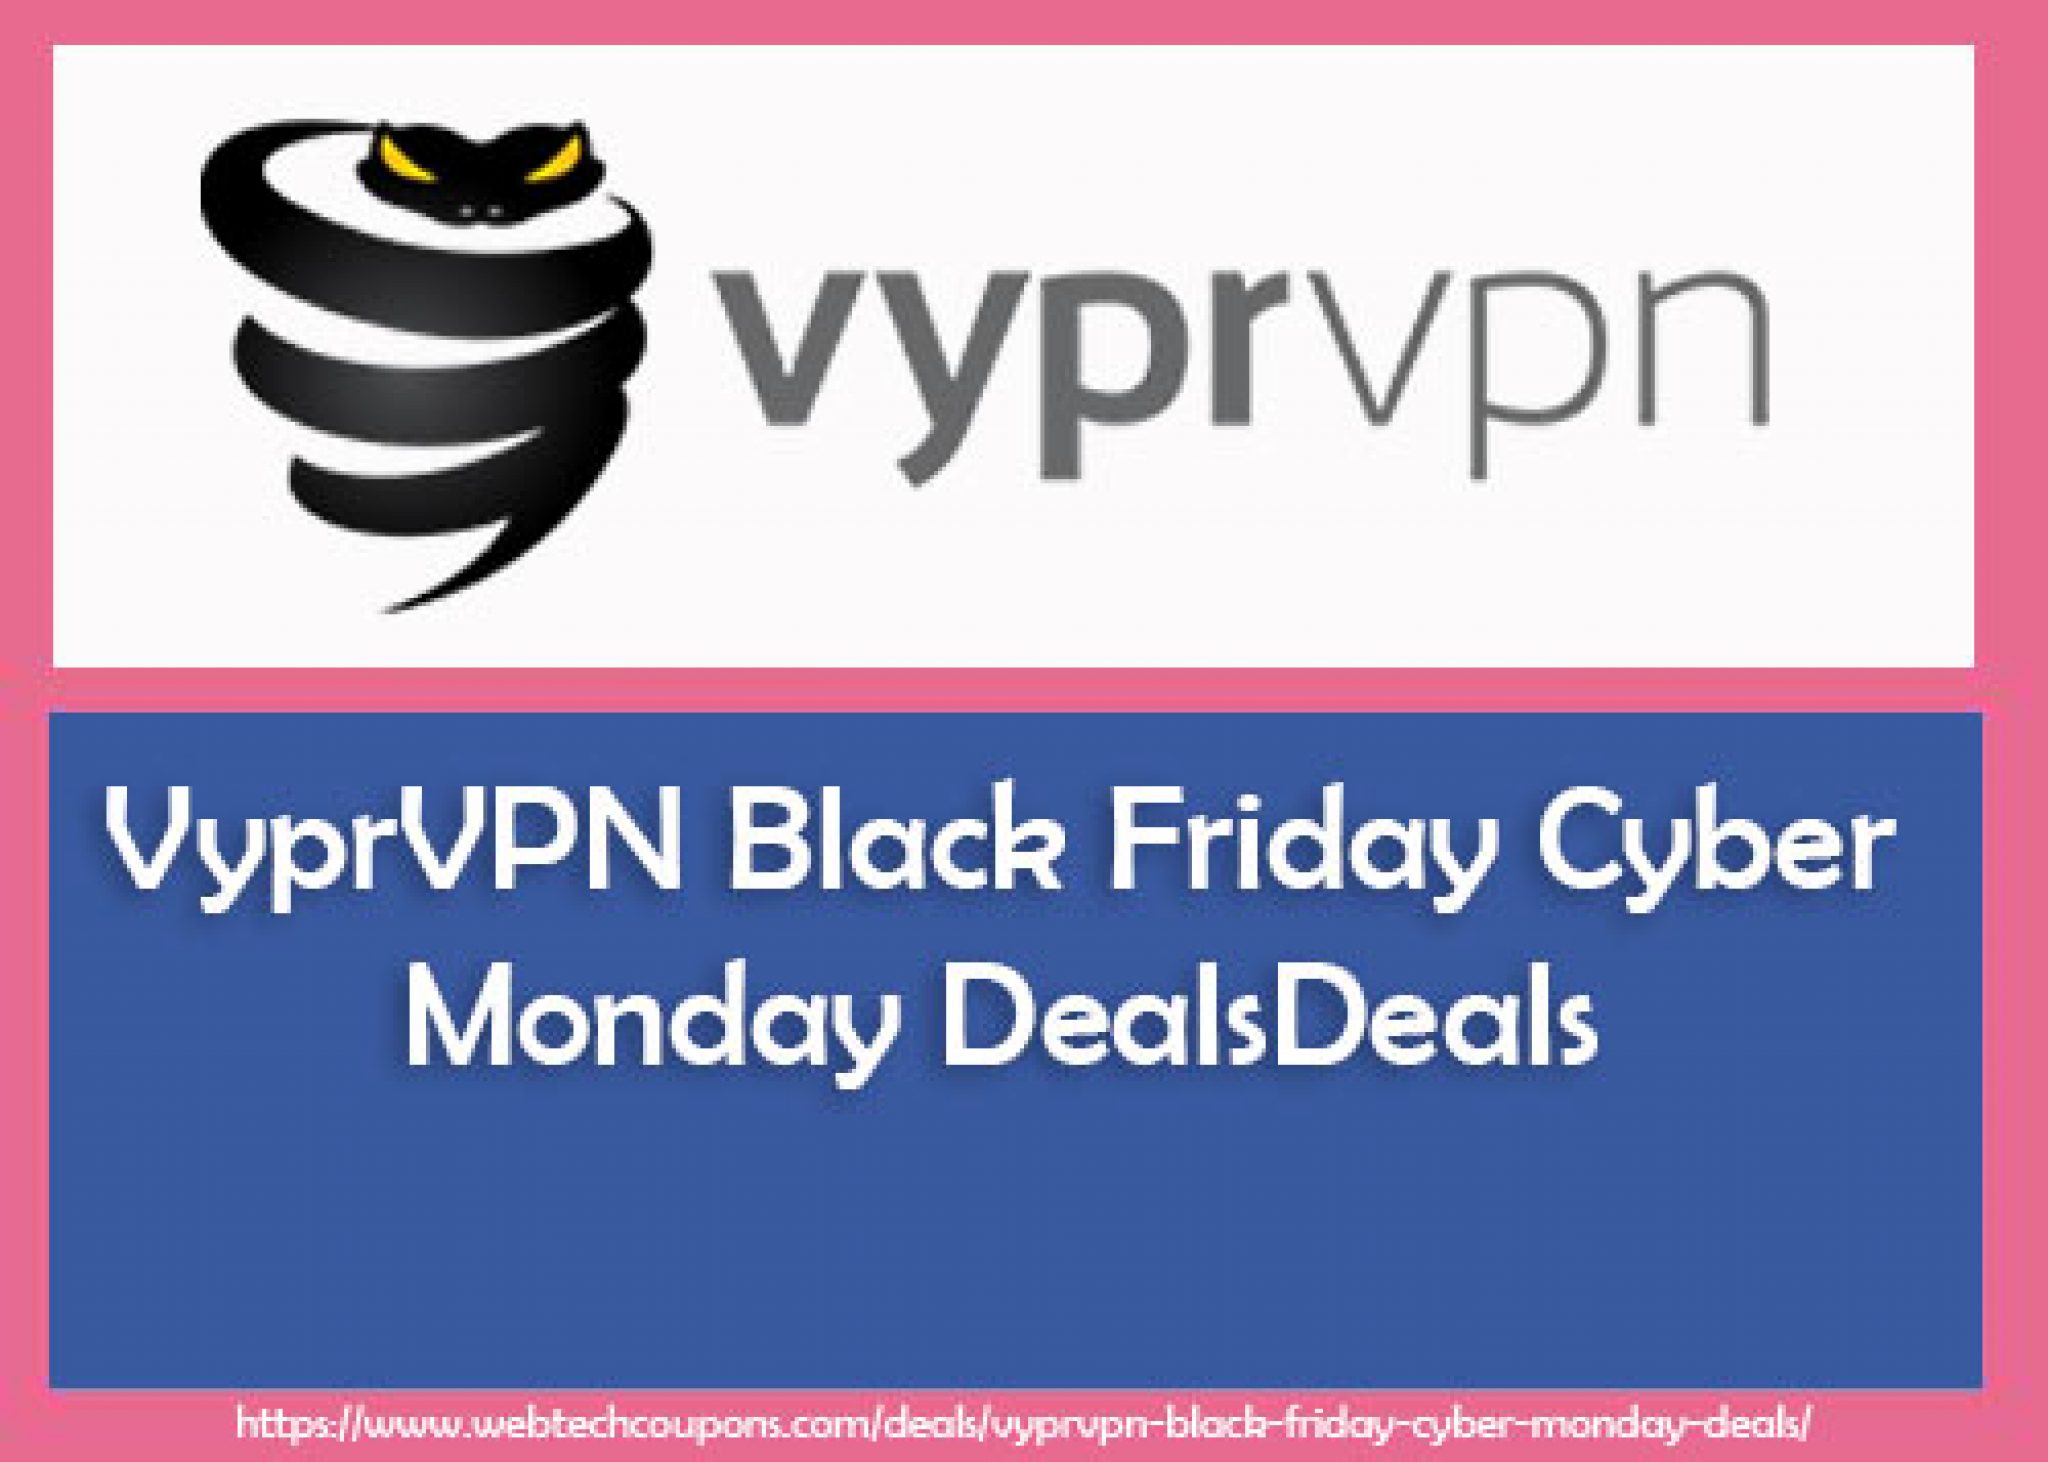 Vyprvpn Black Friday And Cyber Monday Deals 2048x1462 